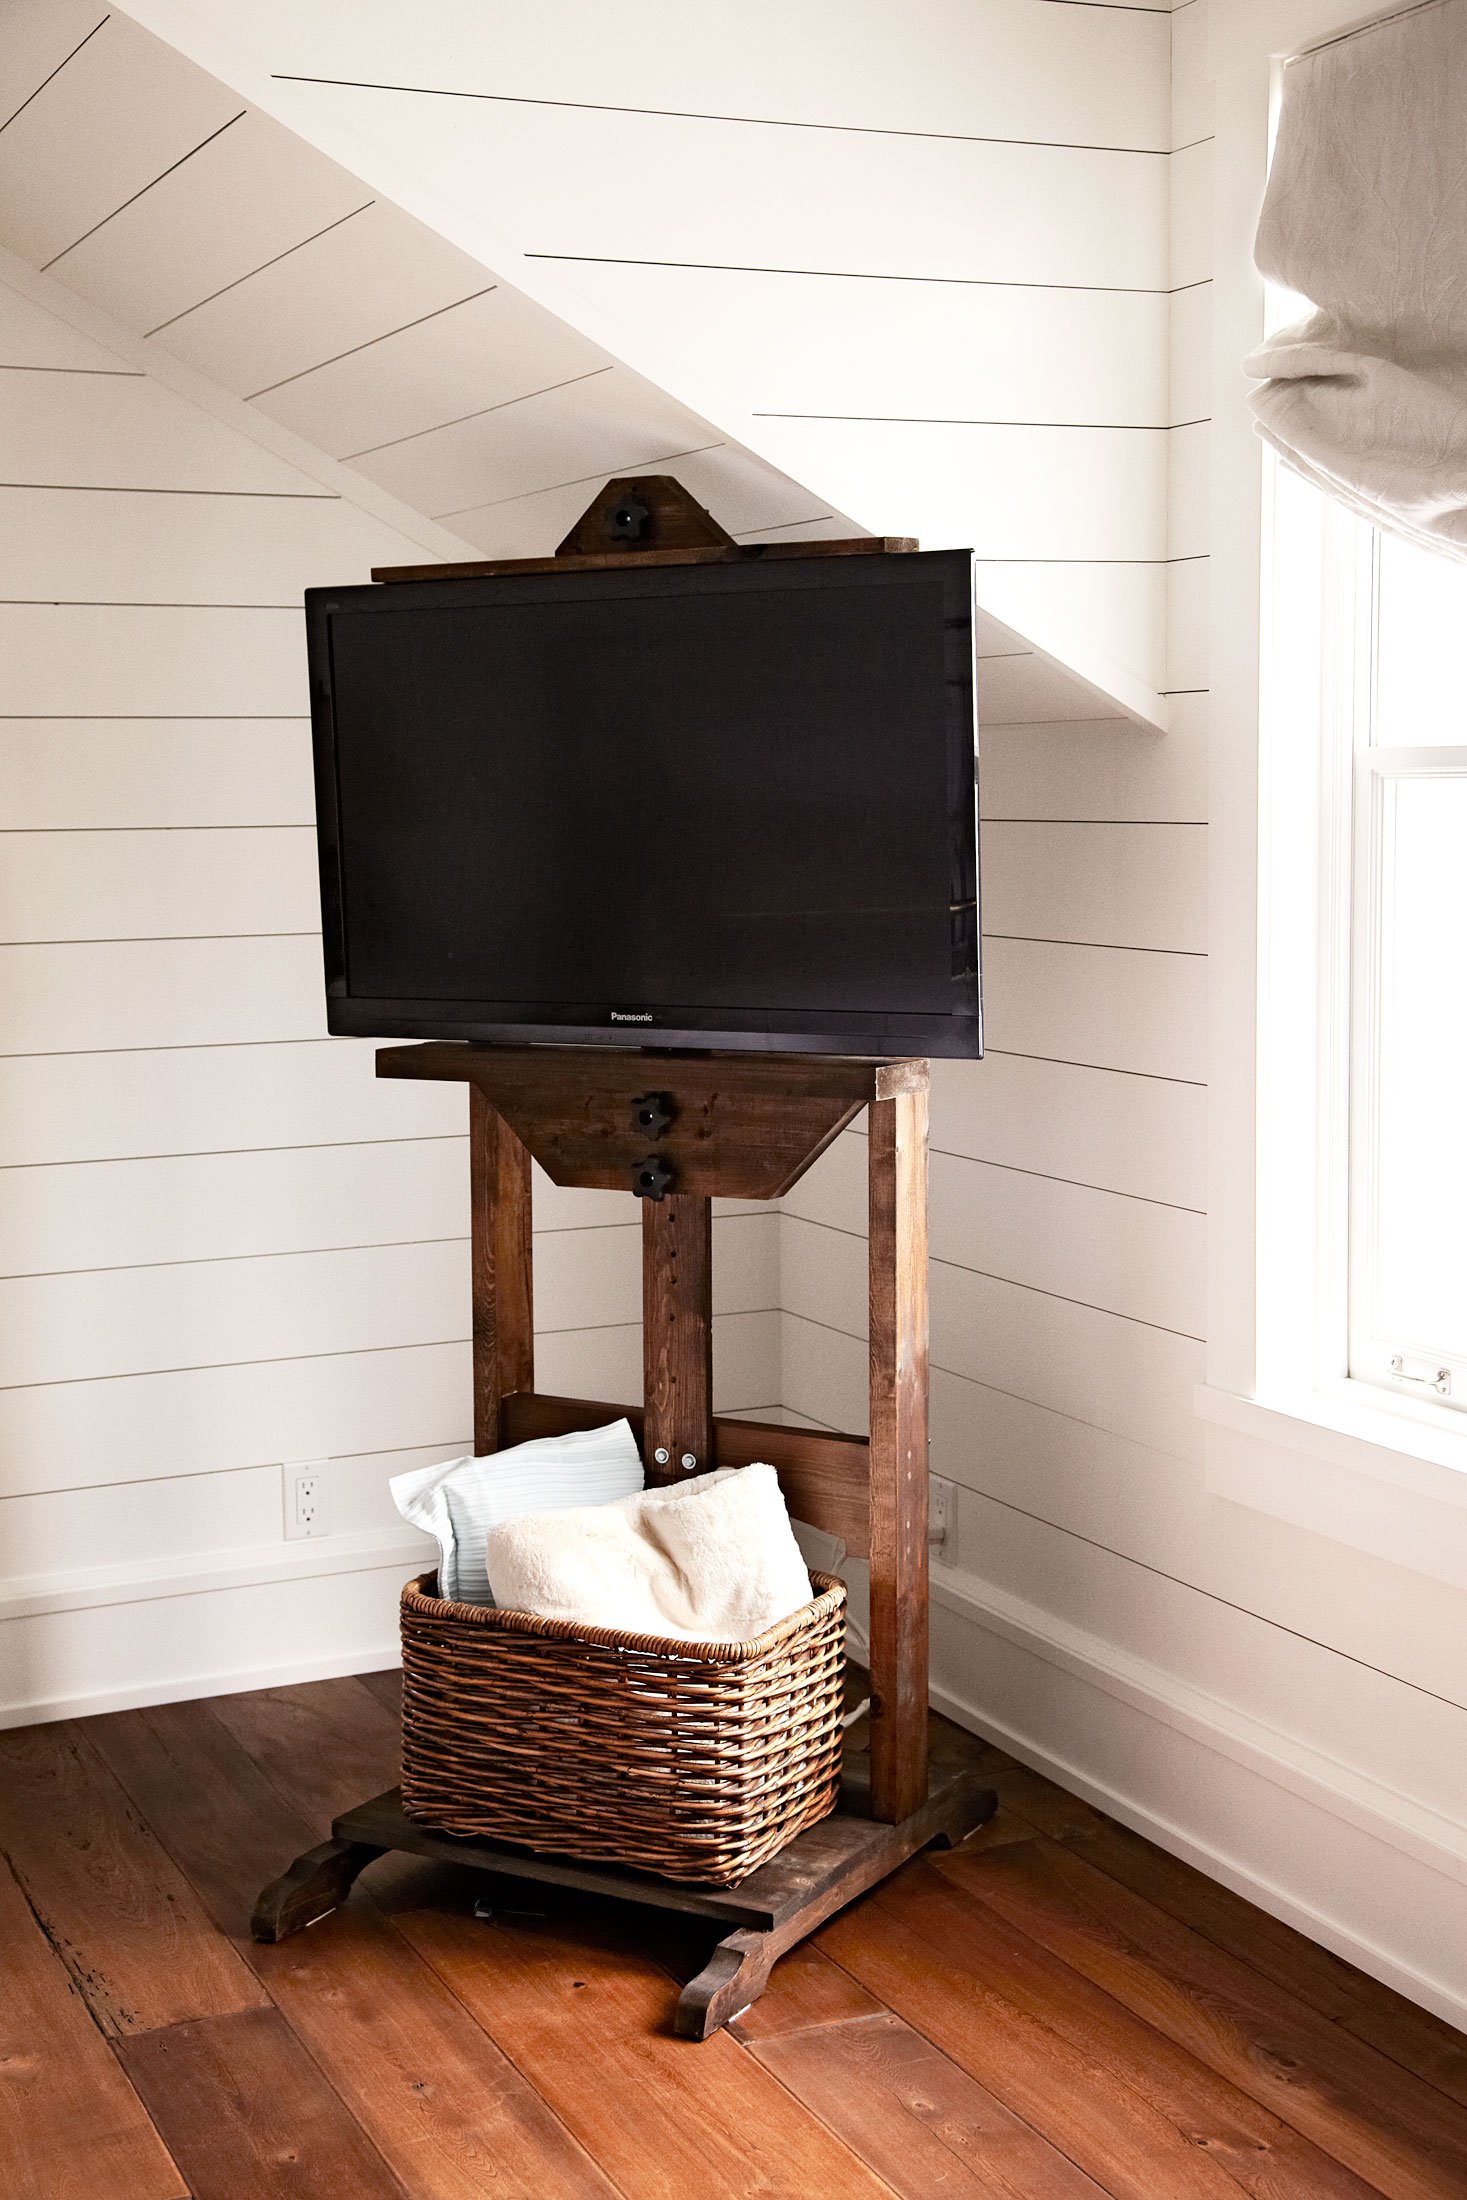 hidden-TV-cables-with-Restoration-Hardware-easel-and-wicker-basket